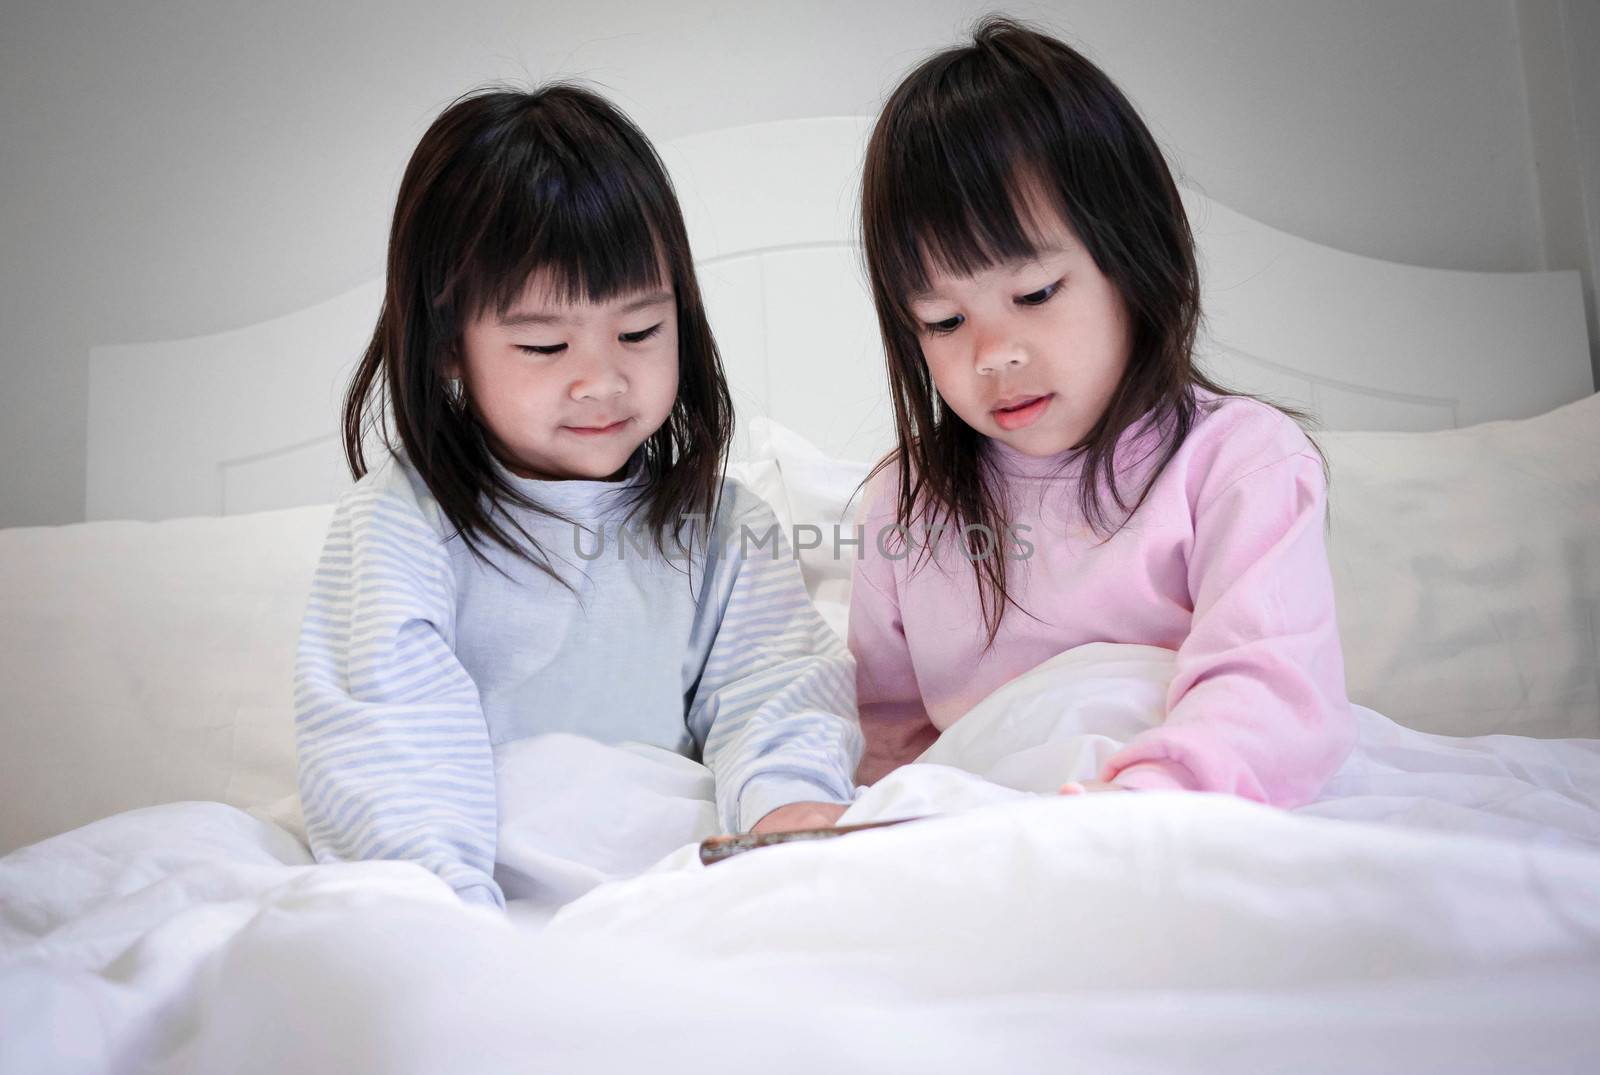 Asian sibling girls in pajamas watching smartphone on a bed at night. mobile addiction technology concept.